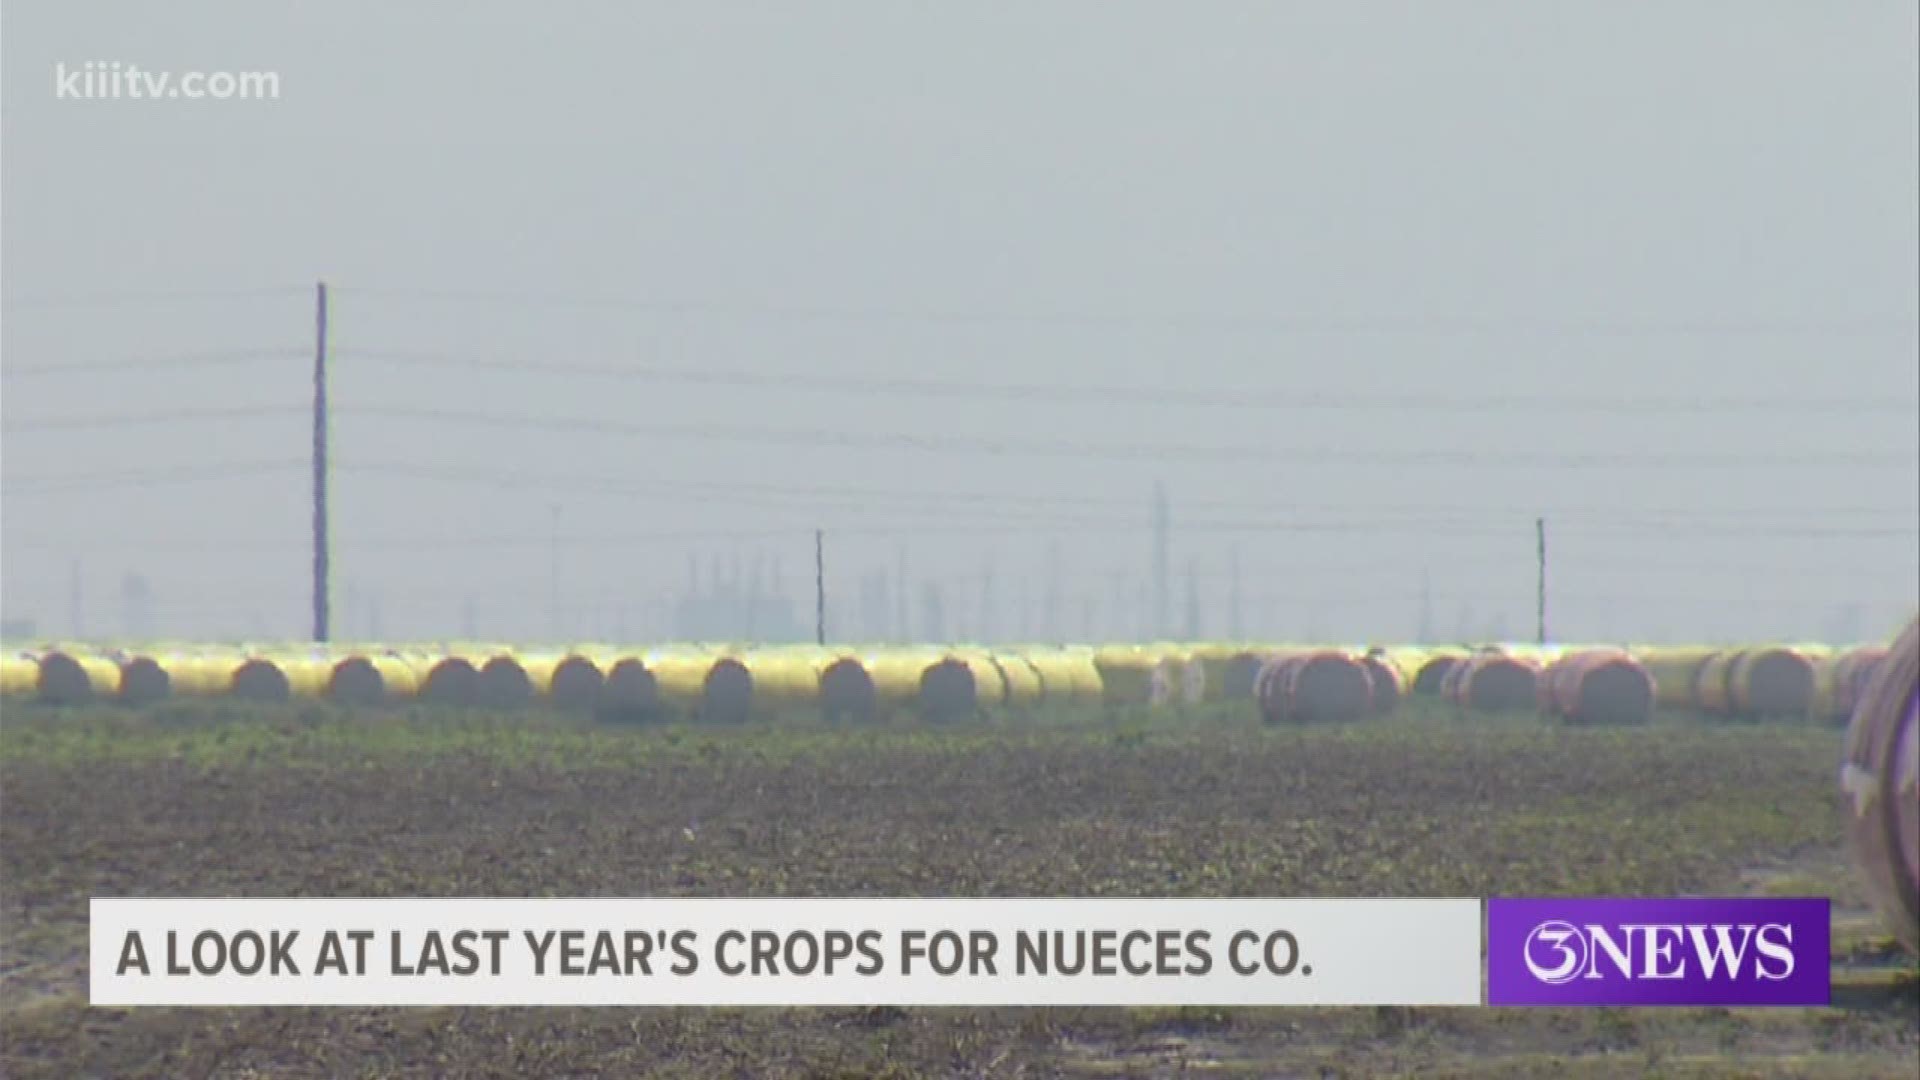 Overall, experts say about $150-million was made in crops for Nueces County.